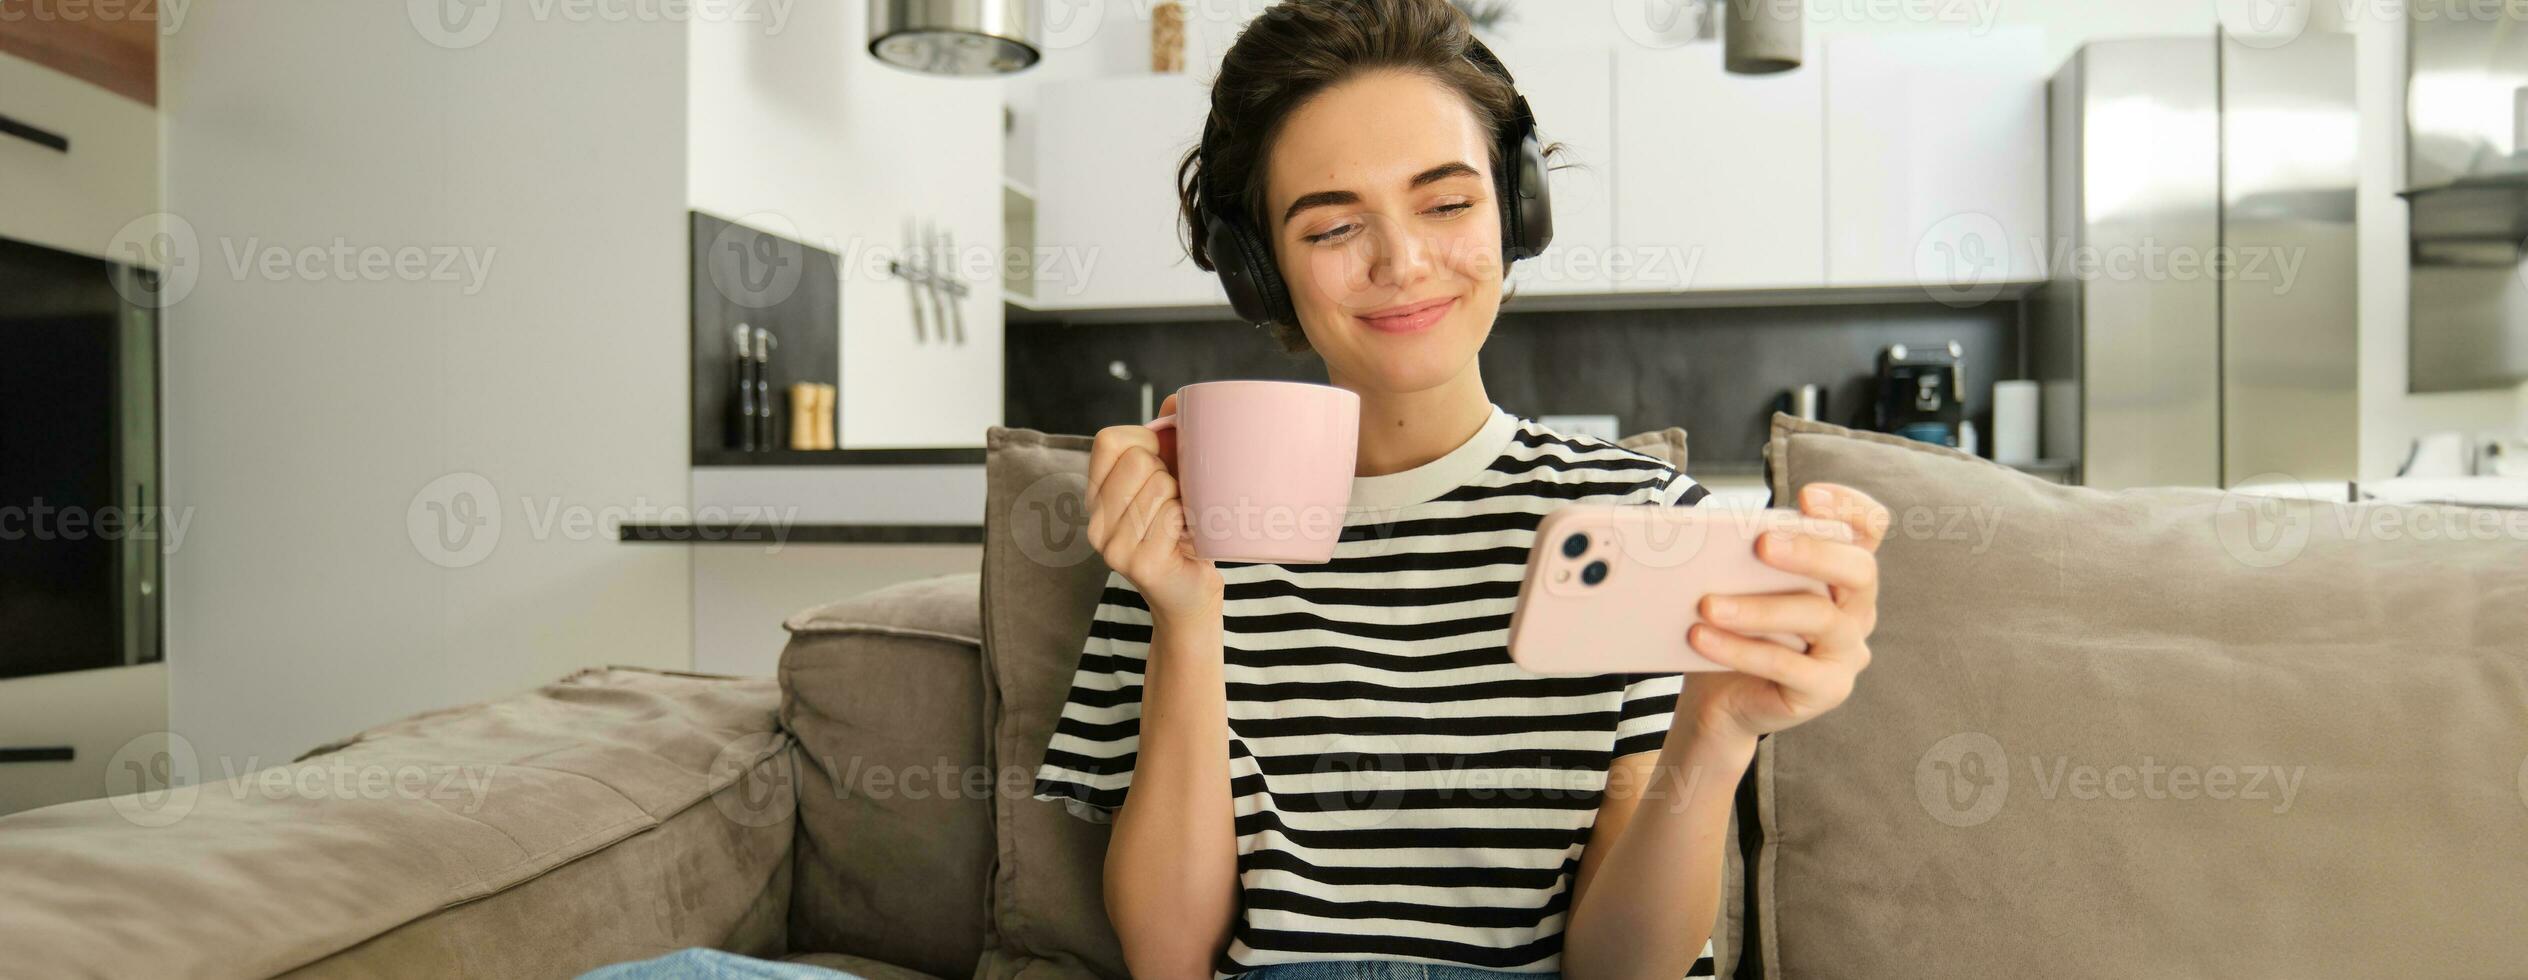 Smiling girl watching tv show on smartphone, wearing headphones, drinking tea and sitting on sofa photo